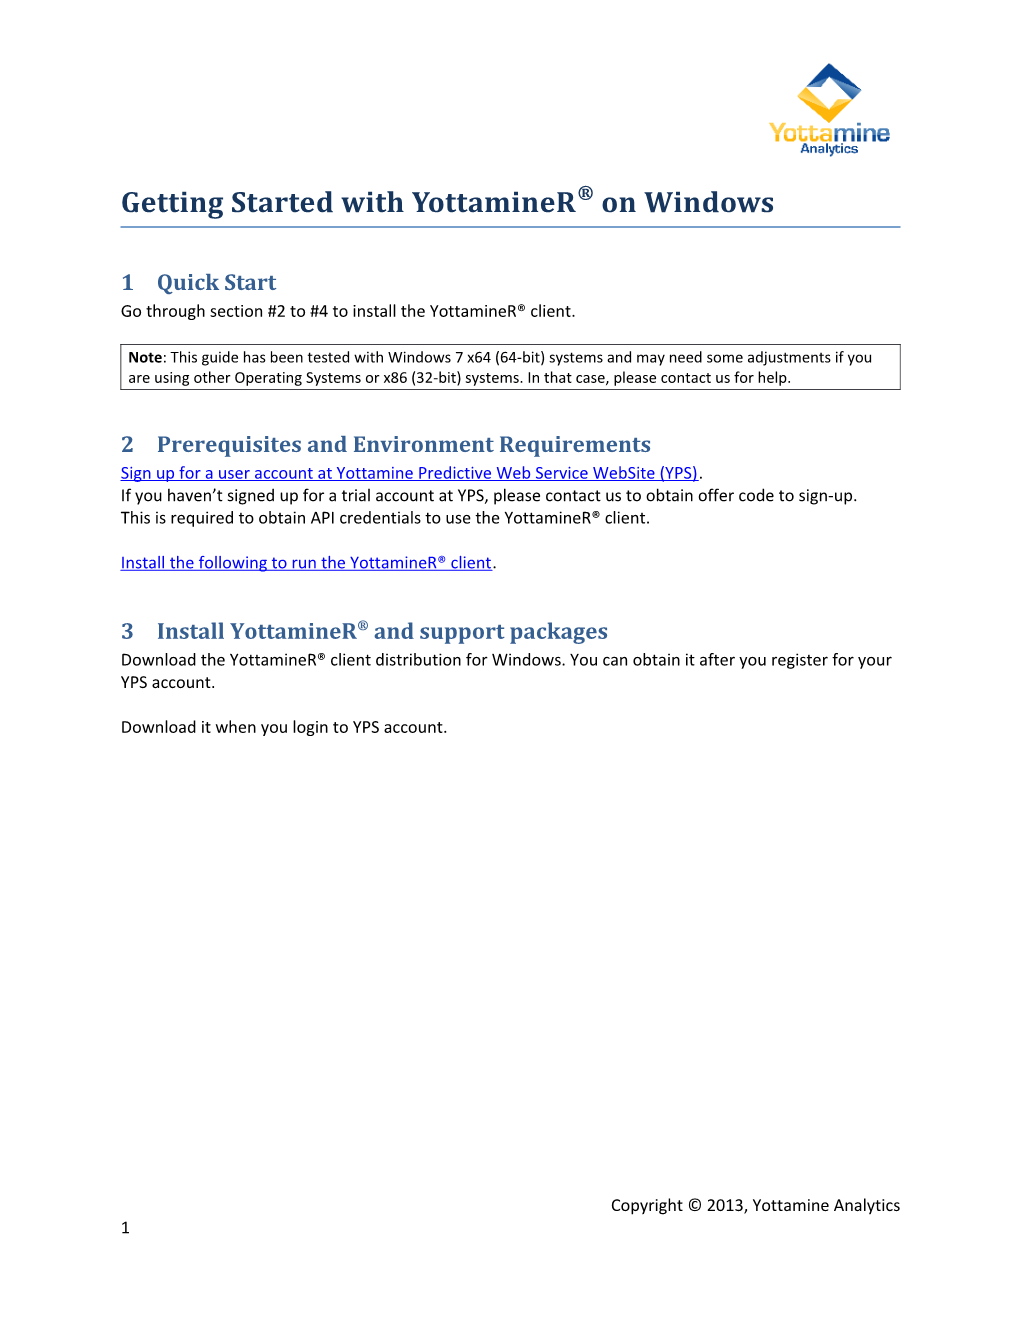 Getting Started with Yottaminer on Windows